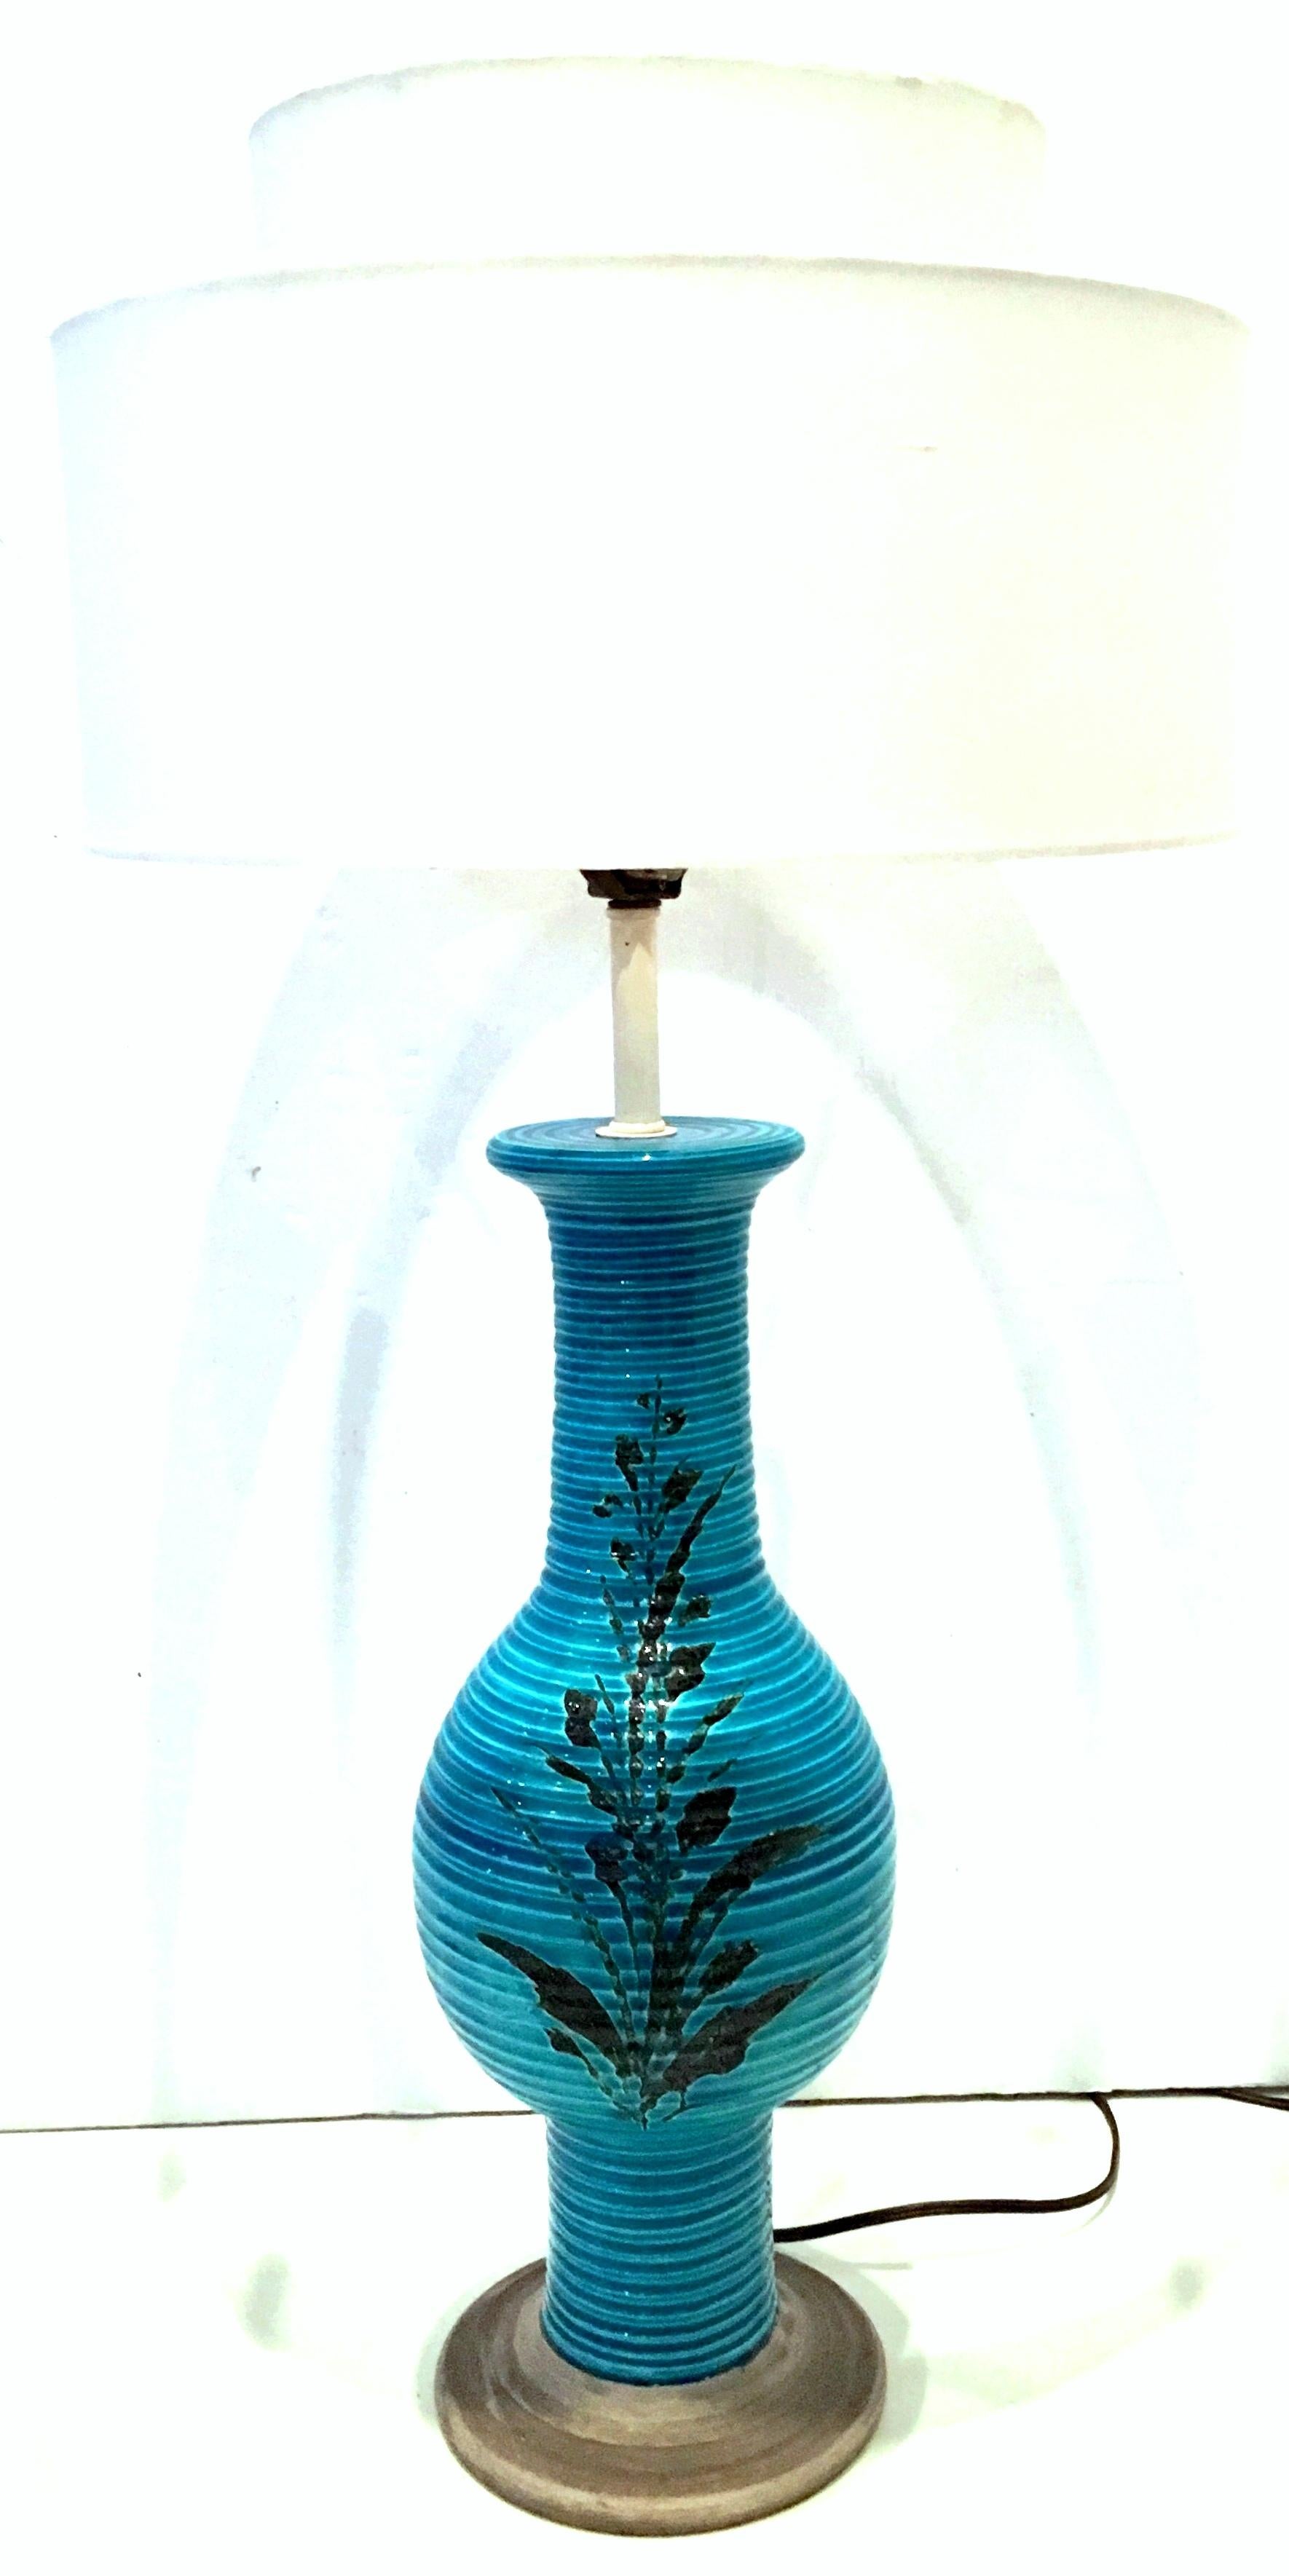 1960'S  Bitossi for Raymor Coveted Italian Hand Crafted, two-tone cerulean blue and black hand-painted, double-sided floral motif ceramic pottery lamp signed and numbered. The faux bois finished base is made of ceramic. The neck and socket, harp and